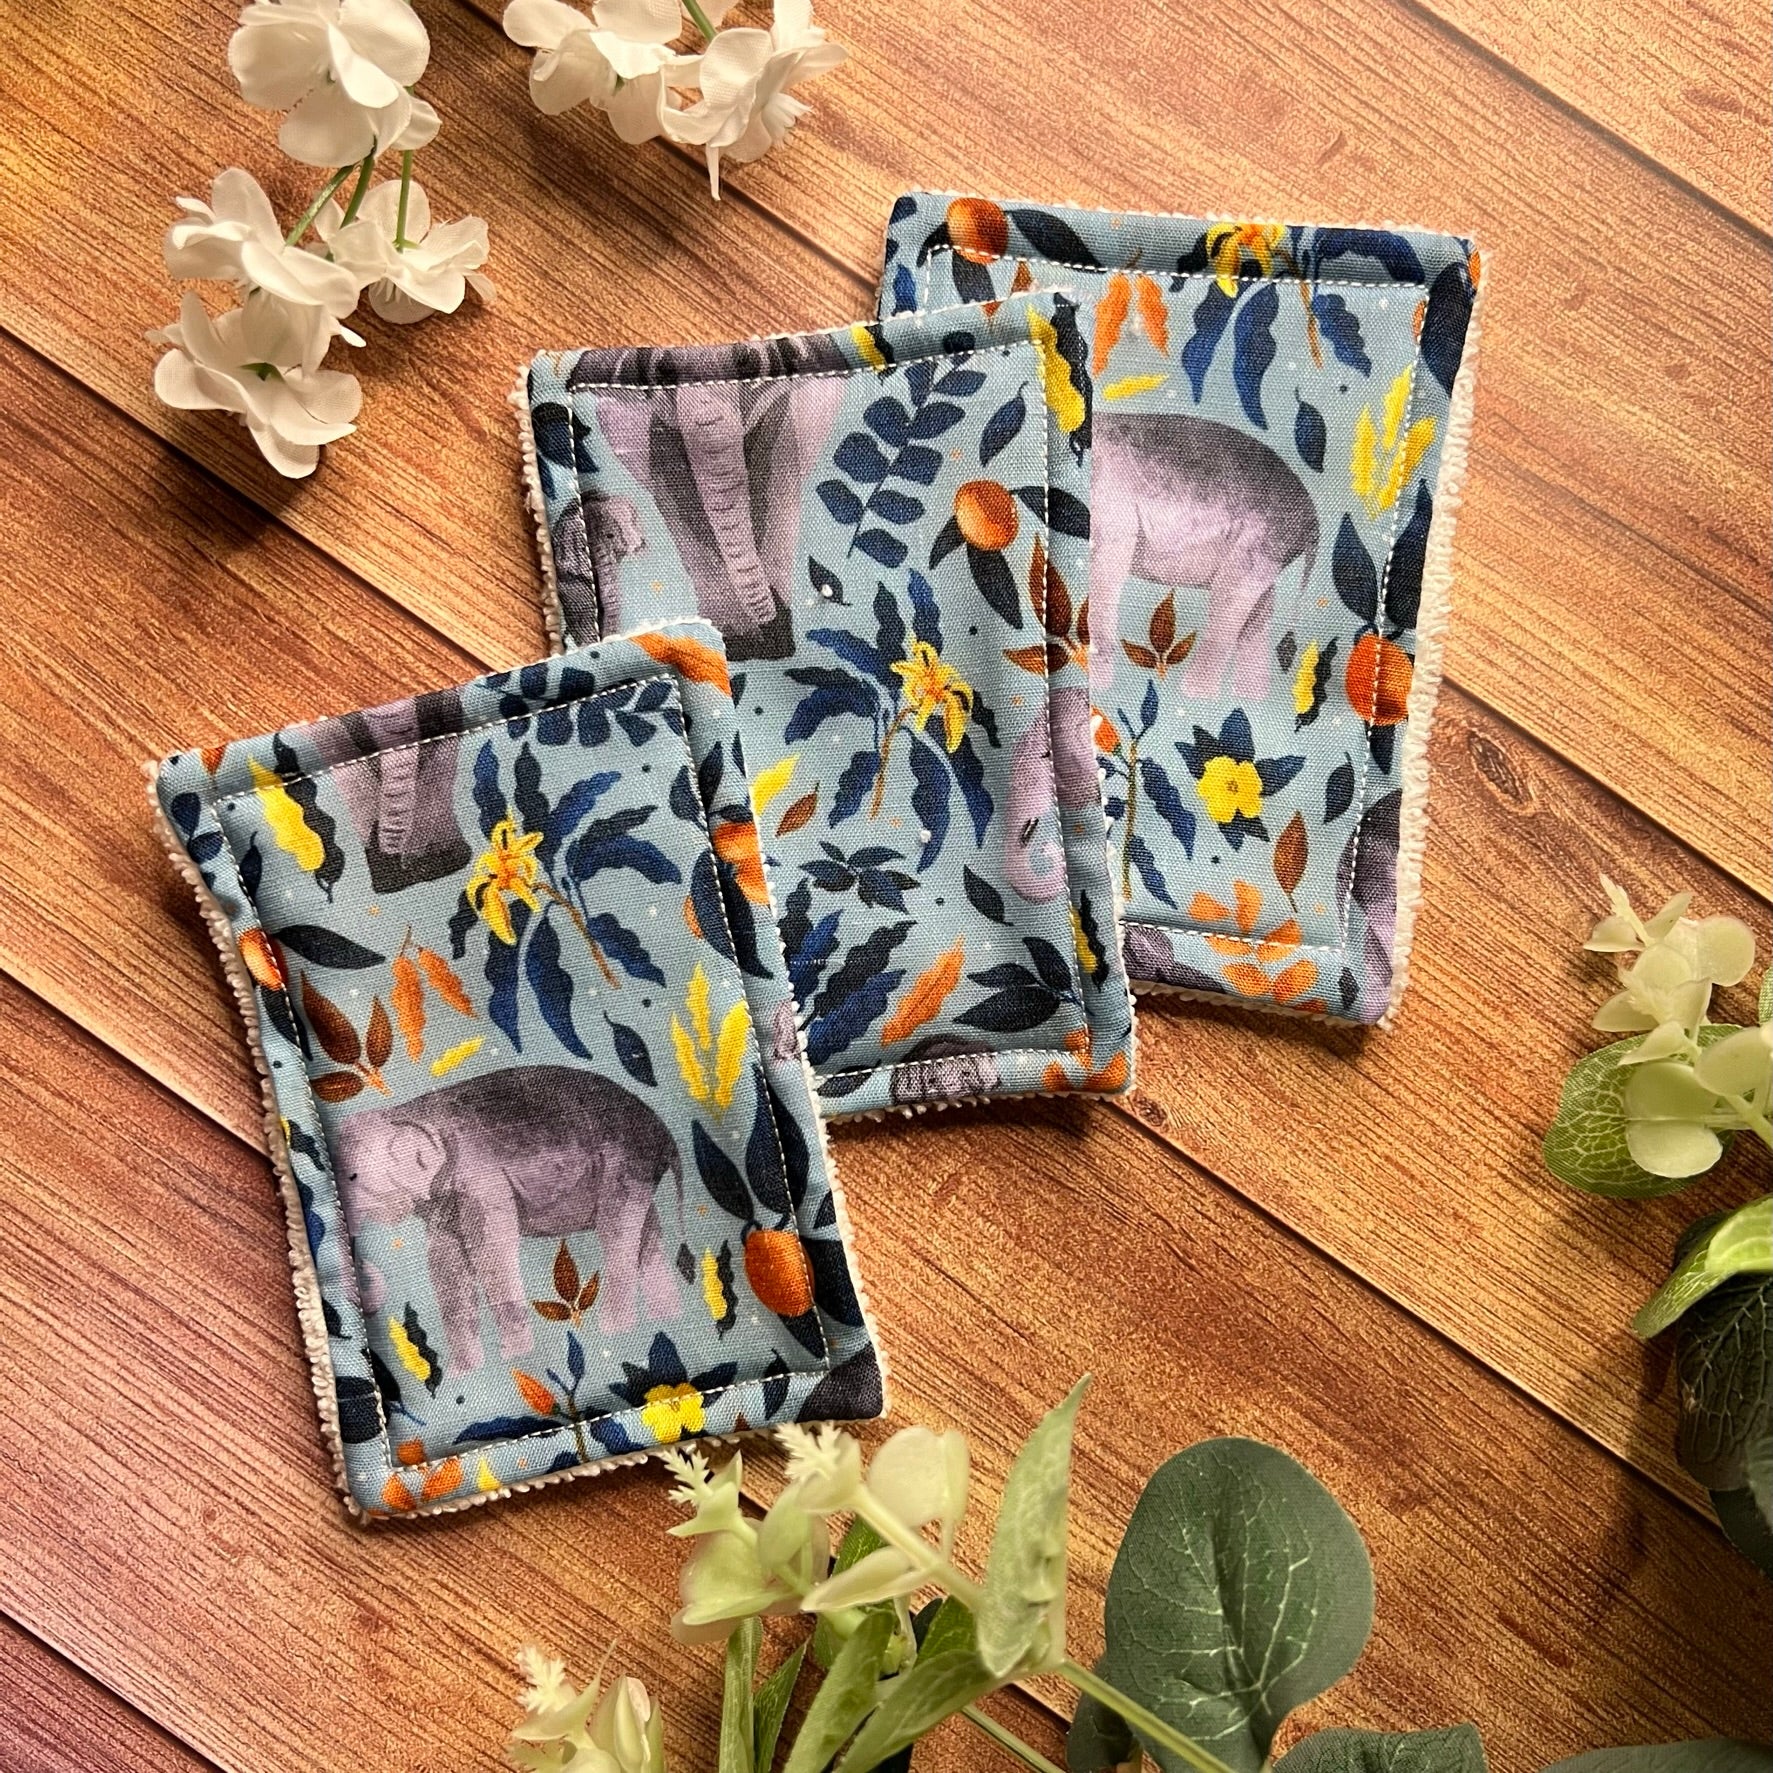 an eco friendly gift for her, these elephant reusable exfoliating face pads are ideal for skincare use and as an elephant gift.